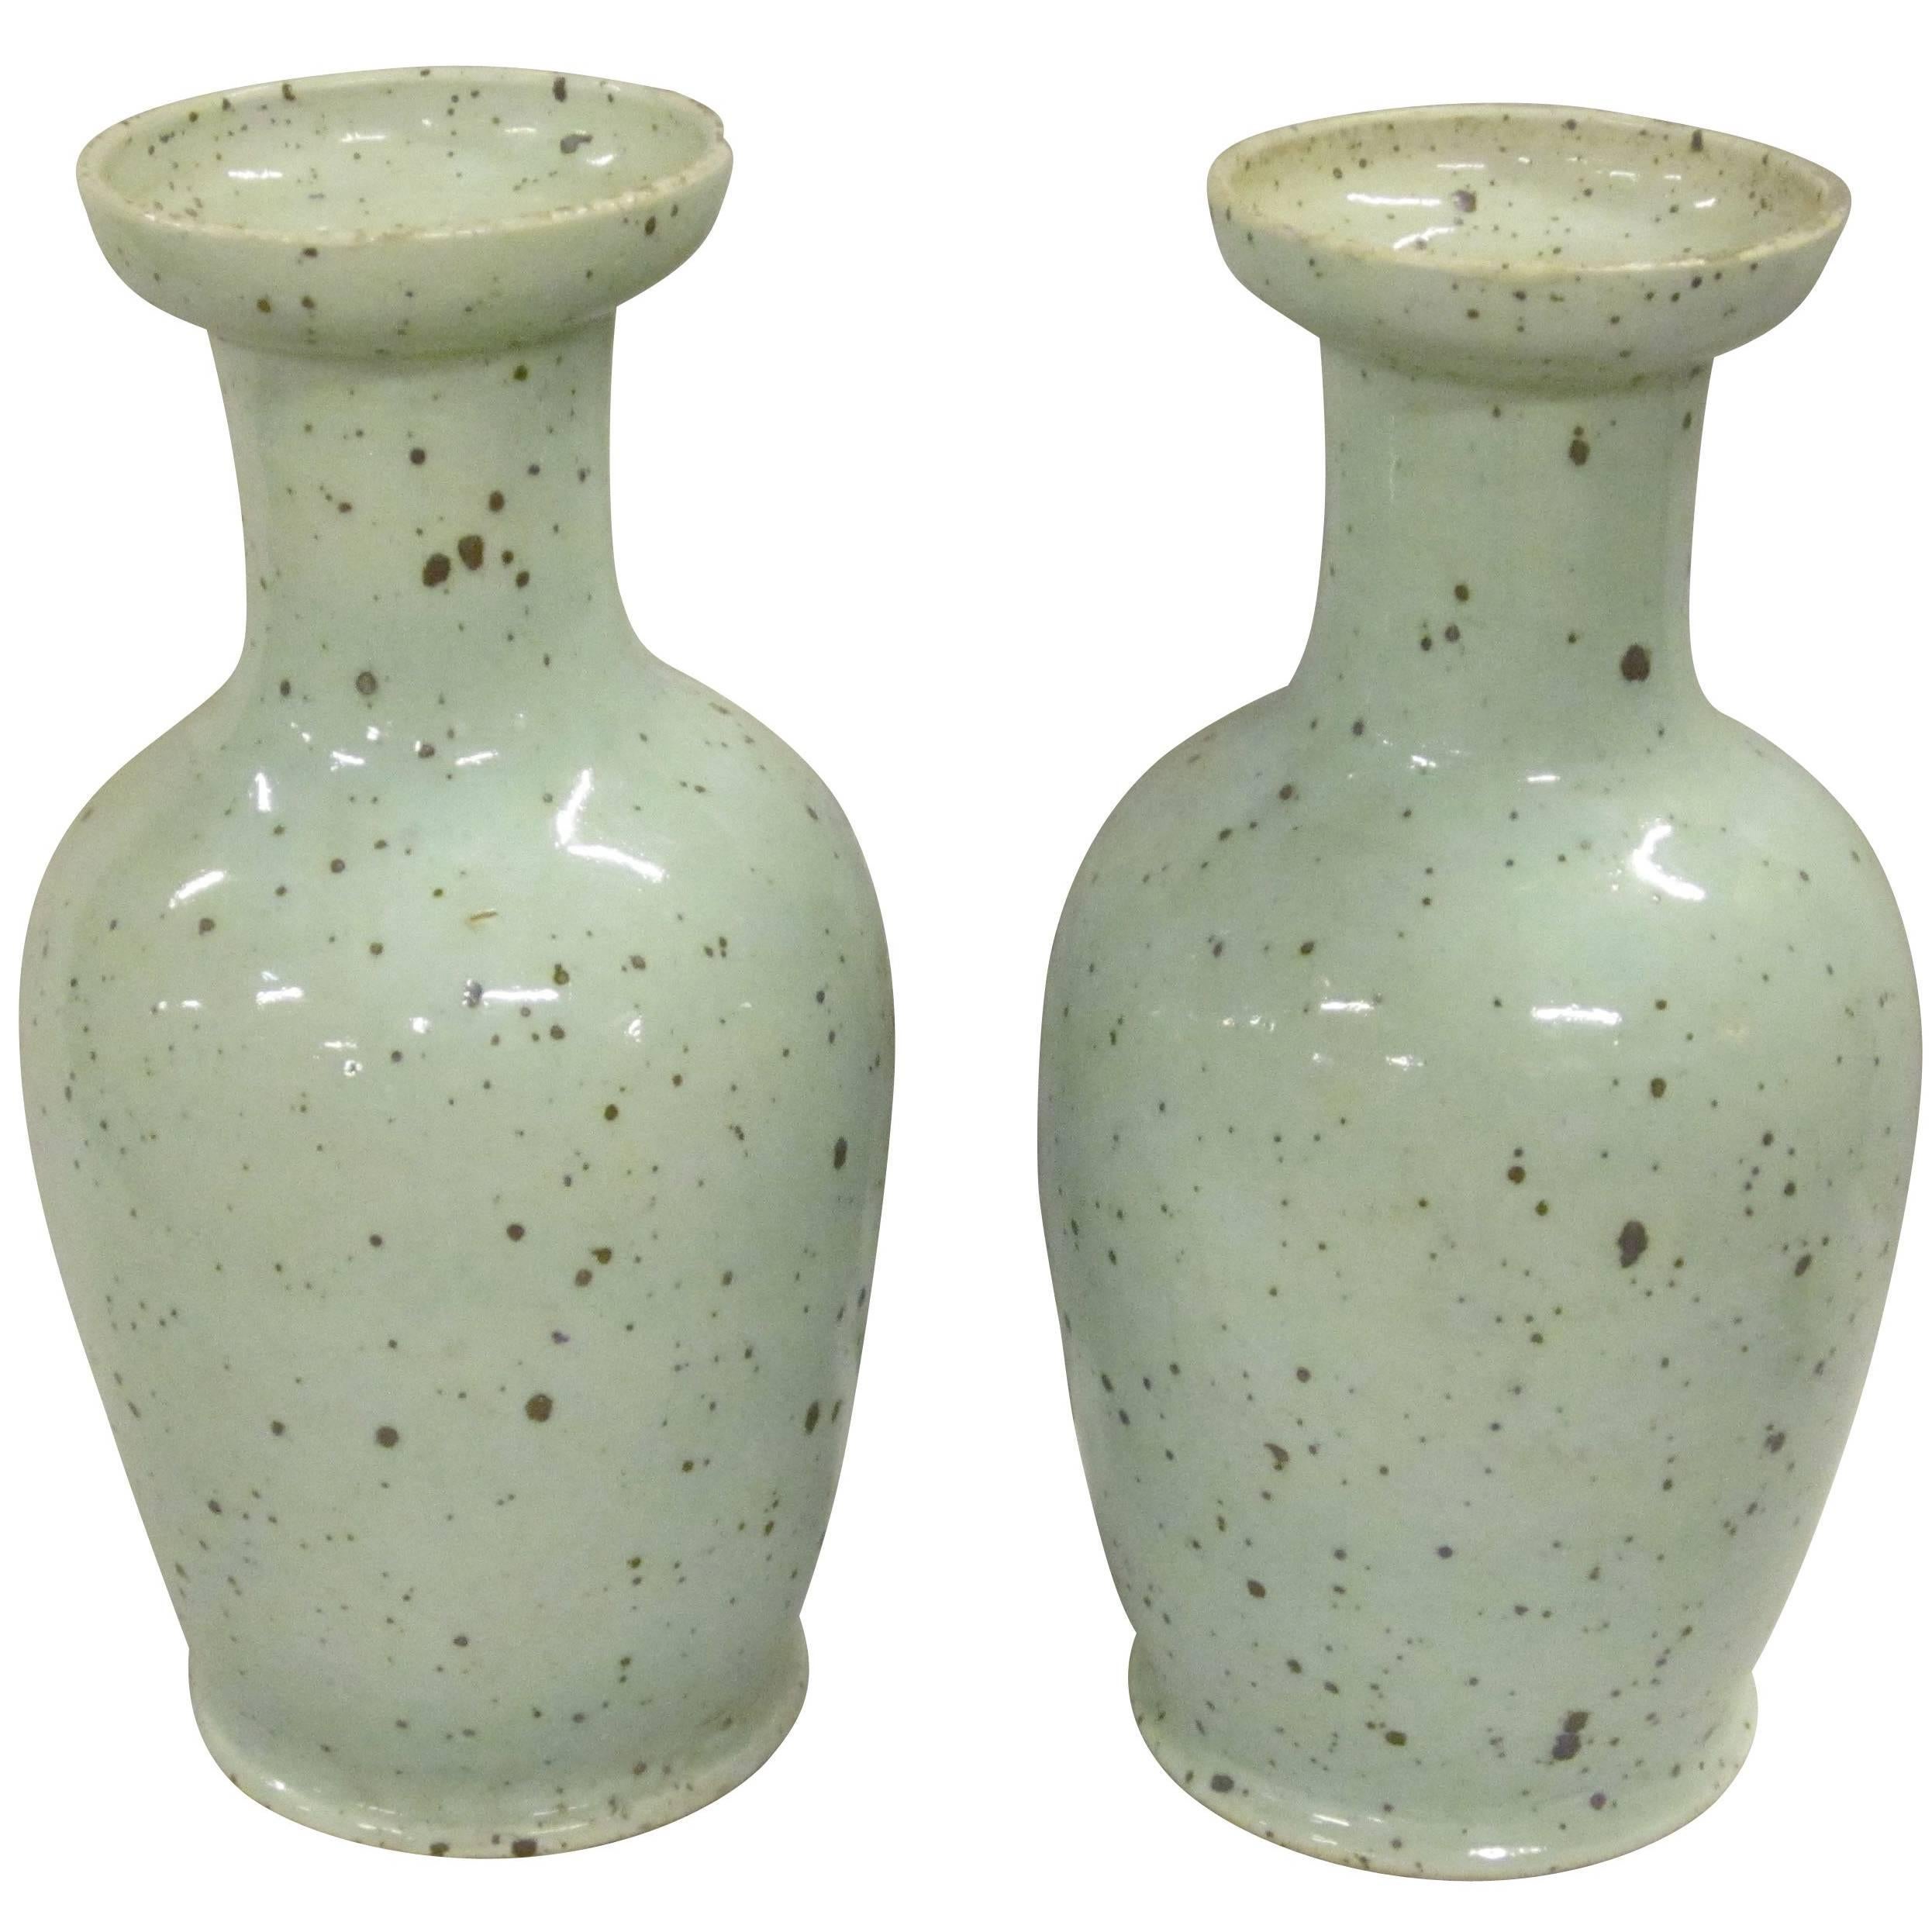 Pair of Robins Egg Blue Dotted Vases, China, Contemporary